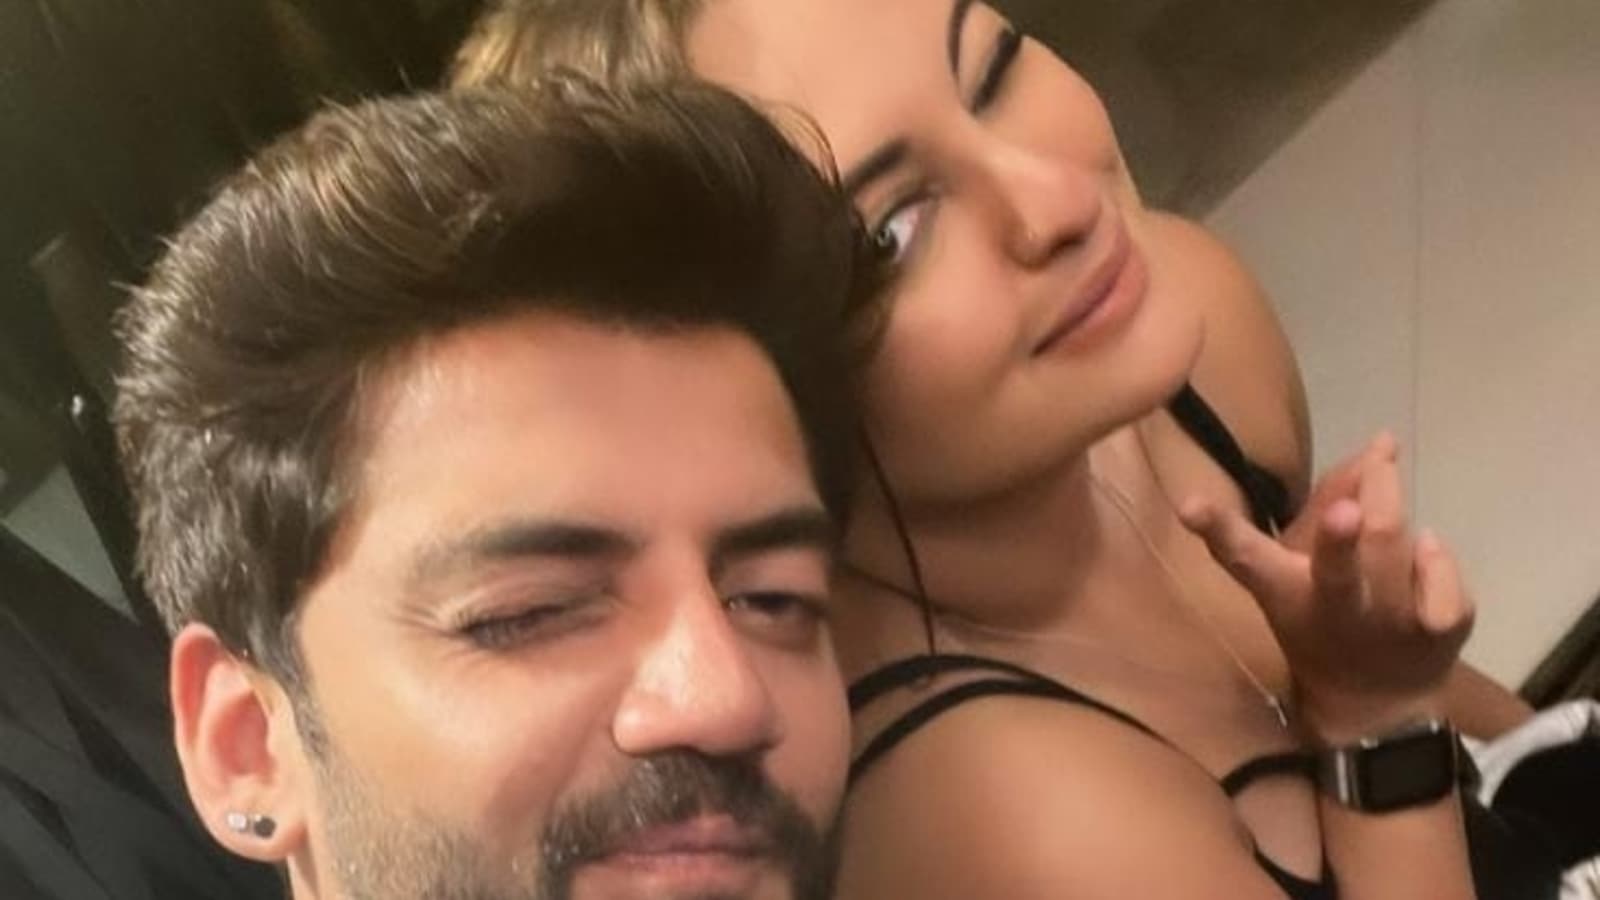 Sonakshi Sinha Sex Videos - Sonakshi winks as she poses with rumoured boyfriend Zaheer Iqbal in new pic  | Bollywood - Hindustan Times